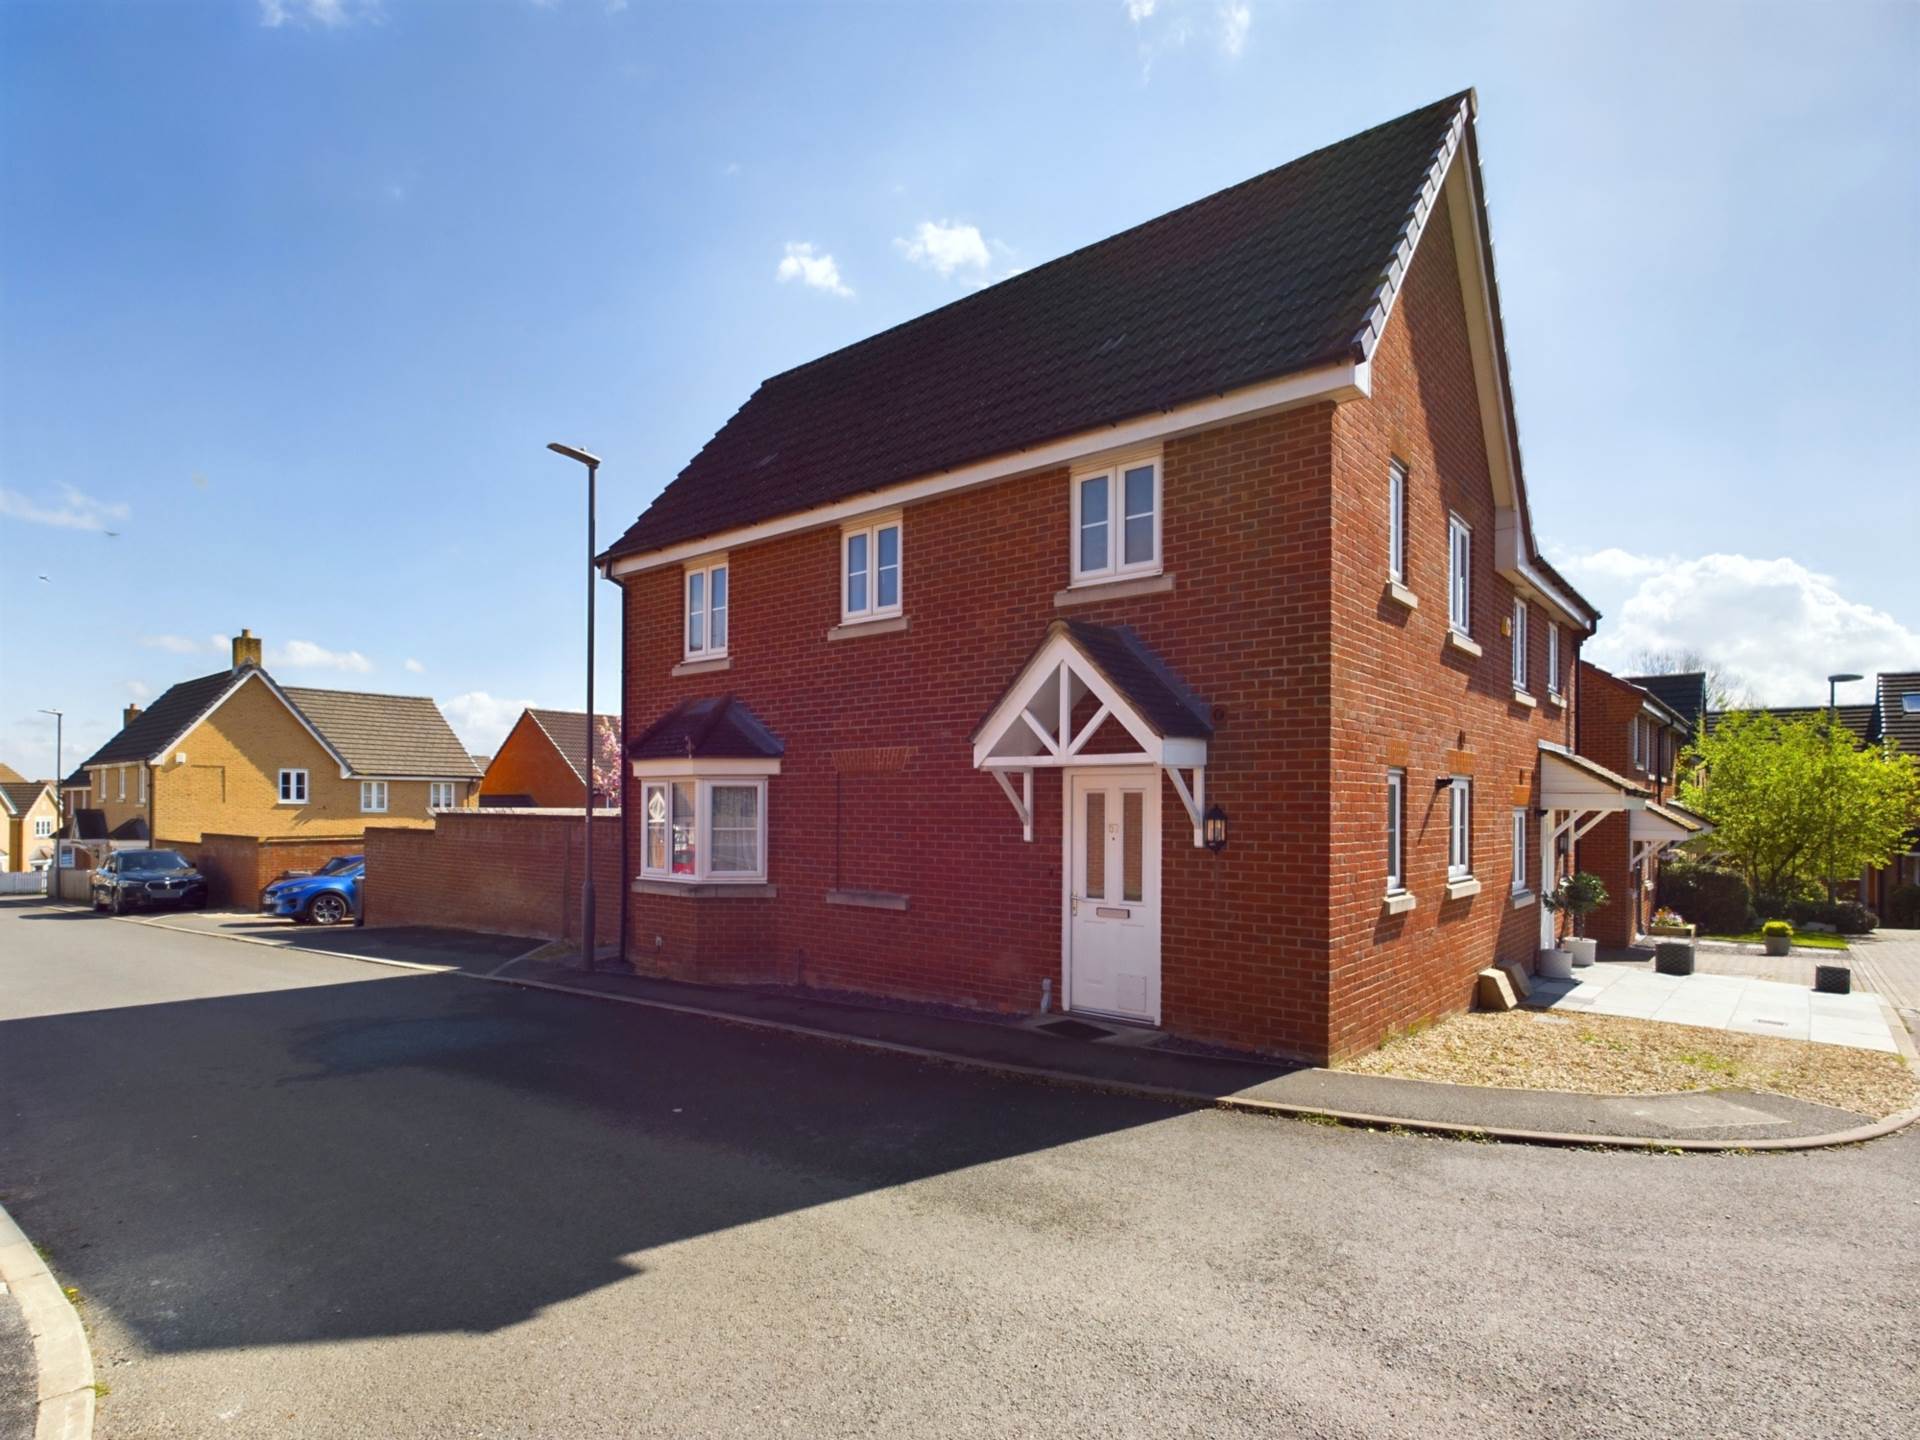 3 bed Semi-Detached House for rent in High Wycombe. From Bonners & Babingtons - Chinnor